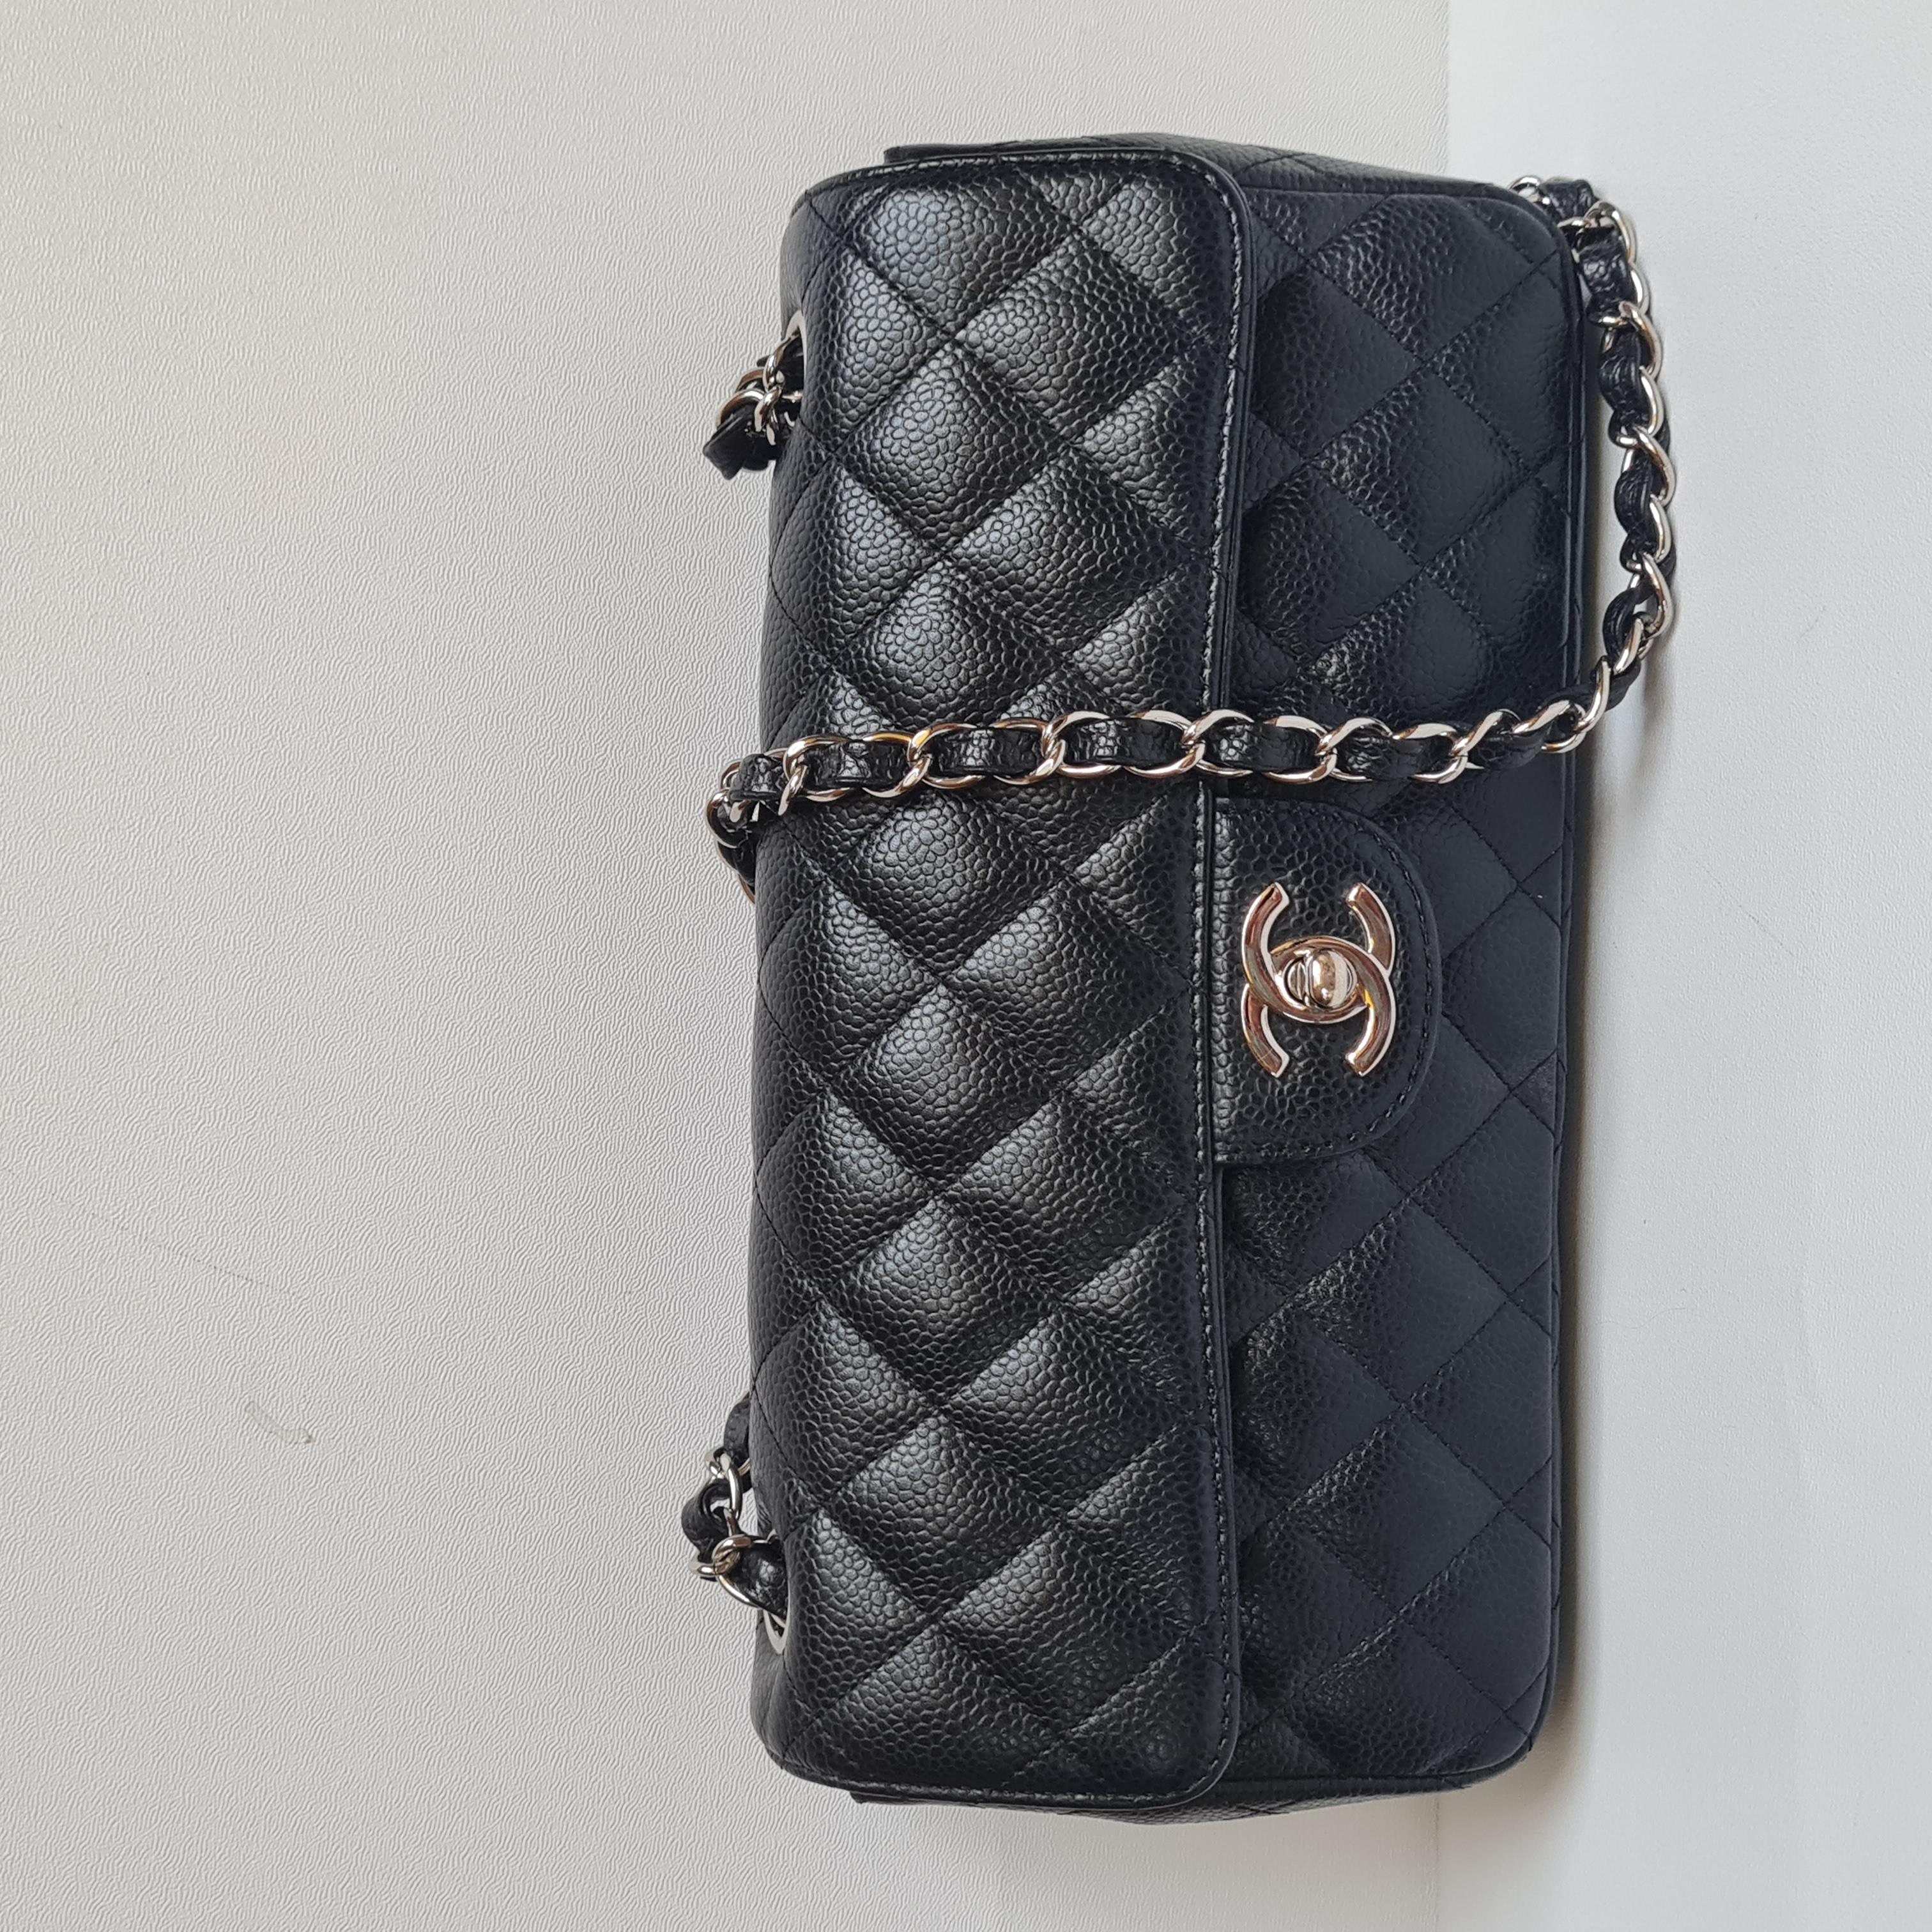 Chanel Black Caviar Quilted East West SHW Flap Bag 9